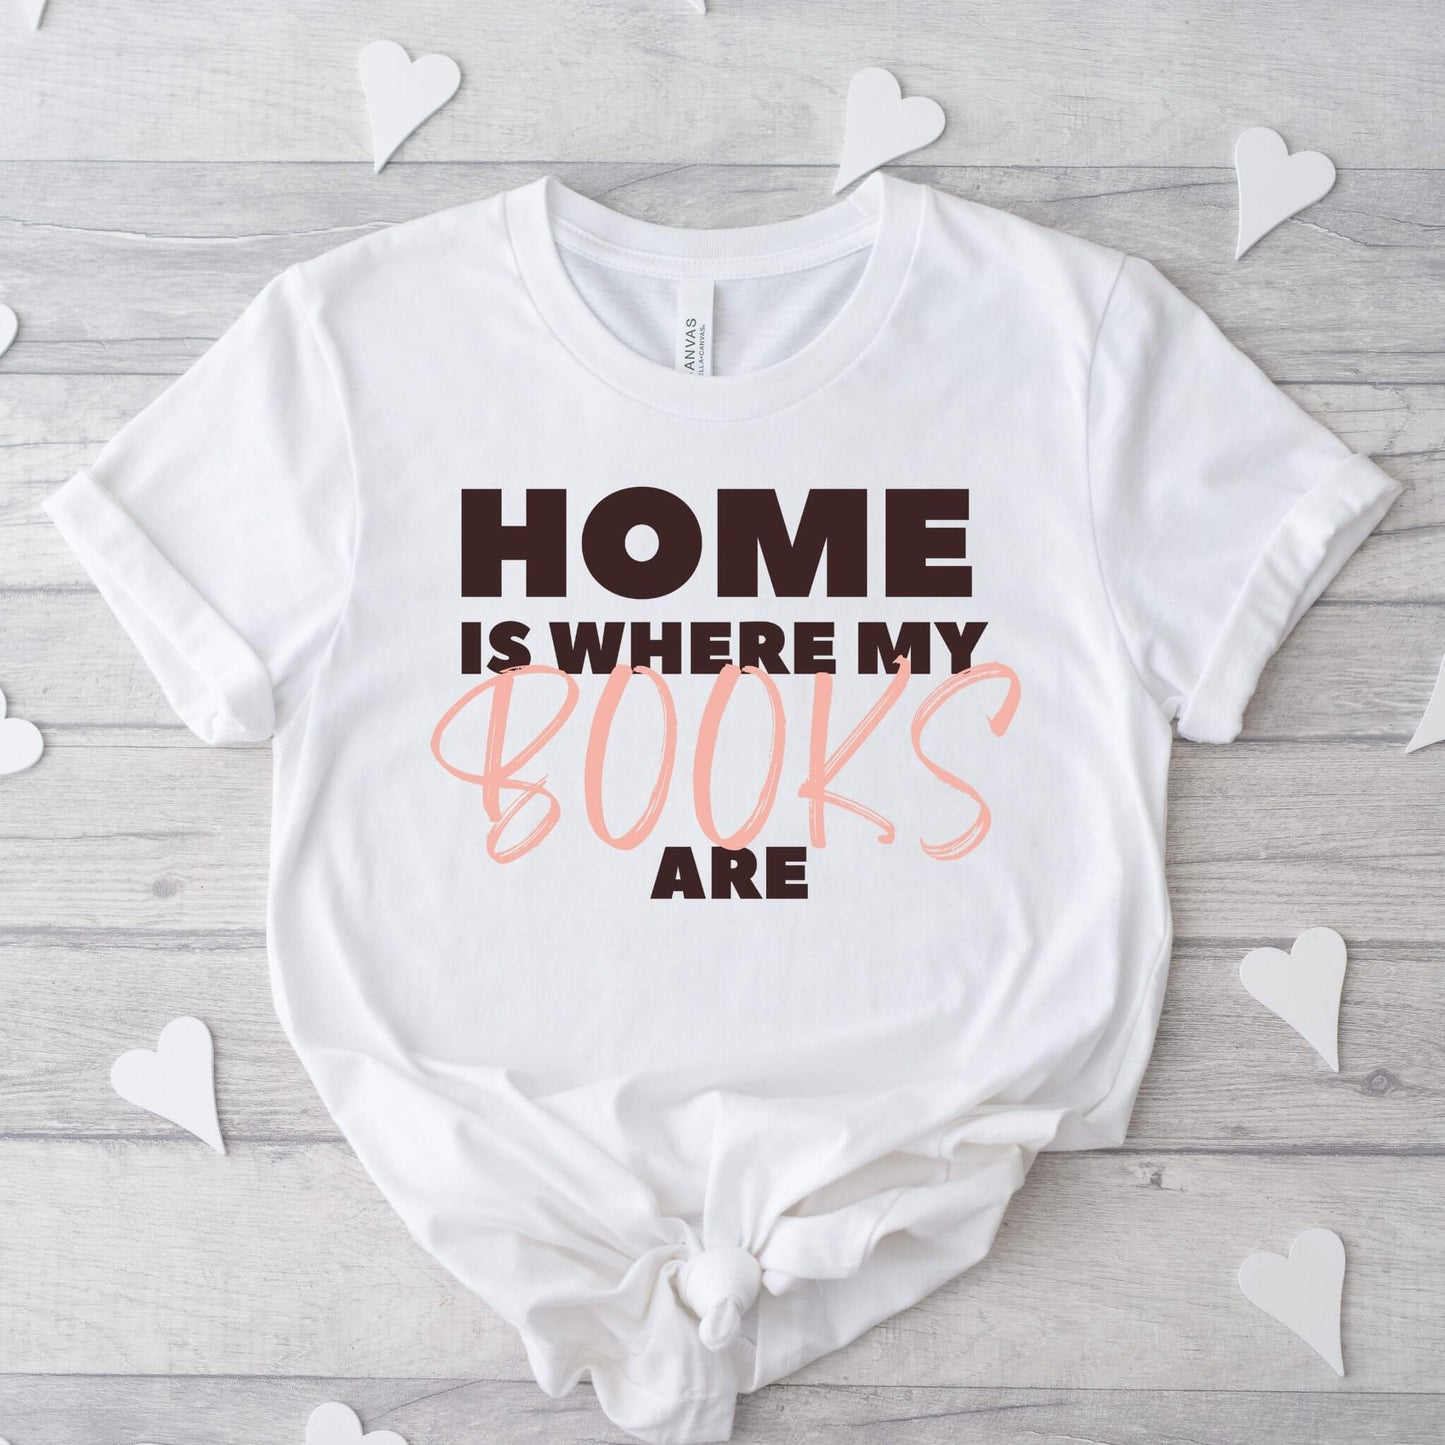 Home Is Where My Books Are - Funny Bookish T-Shirt